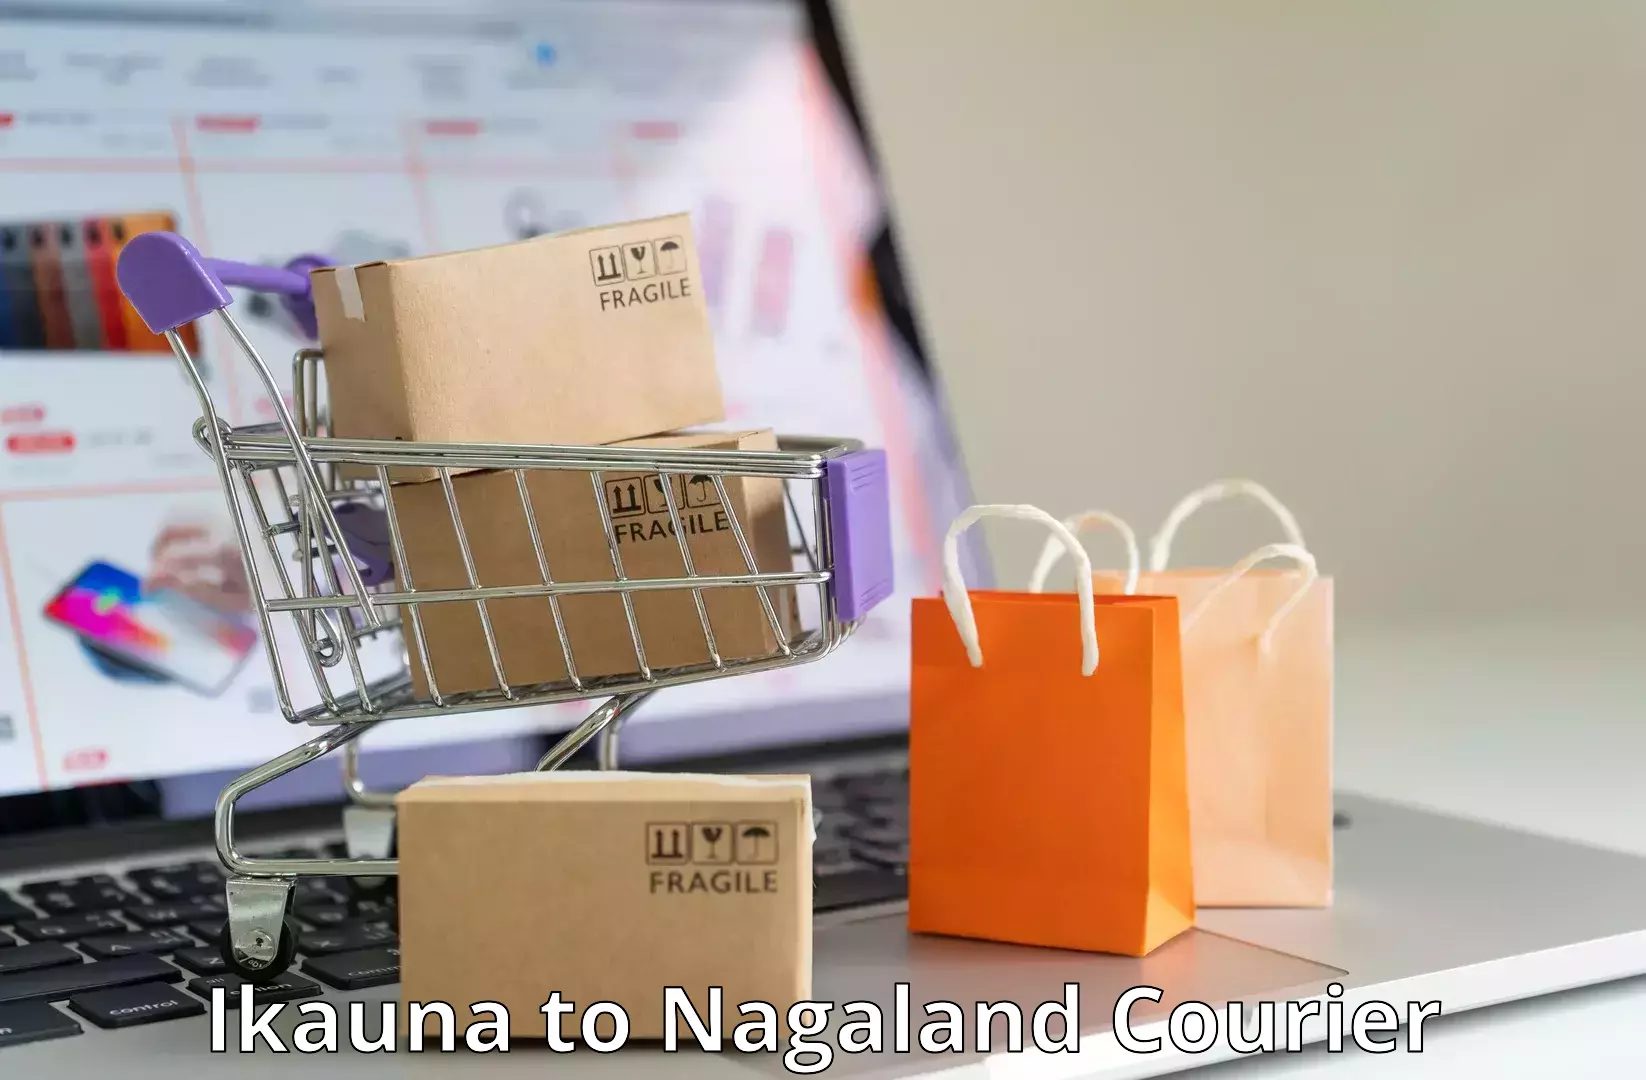 On-call courier service Ikauna to Mon